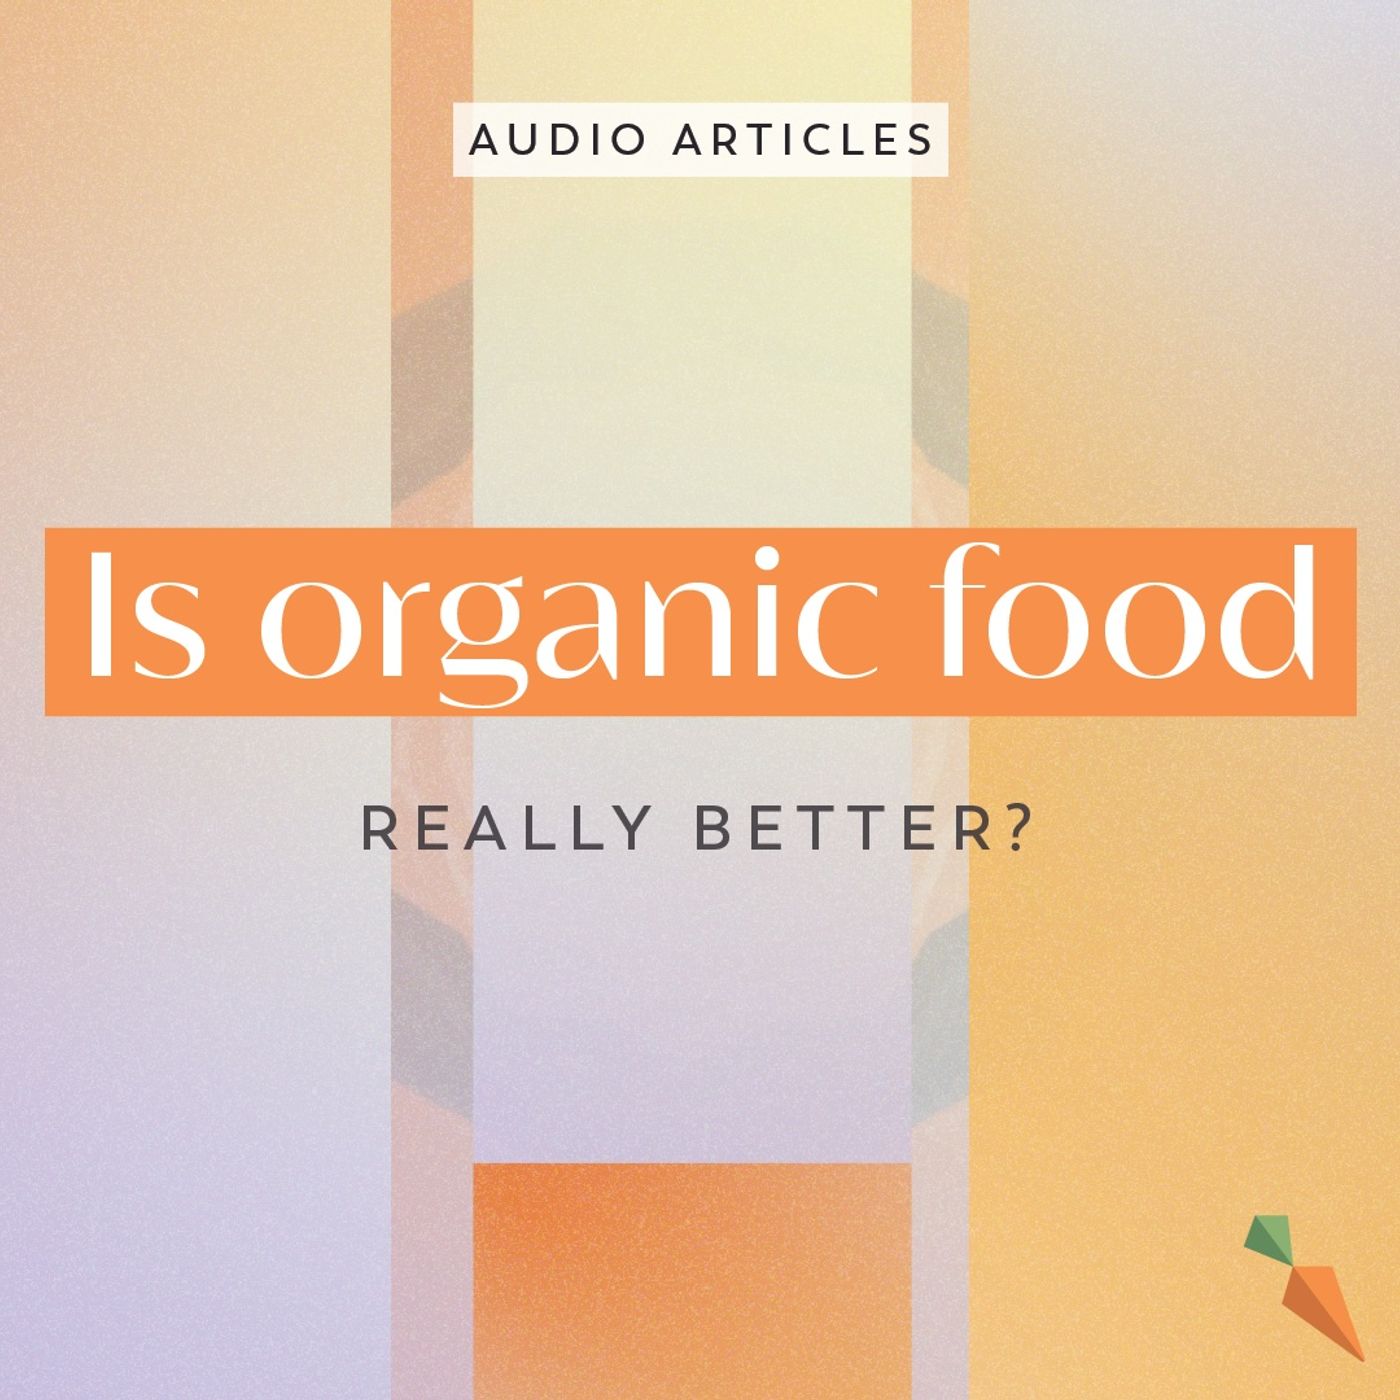 Is Organic Food Really Better? | FoodUnfolded AudioArticle